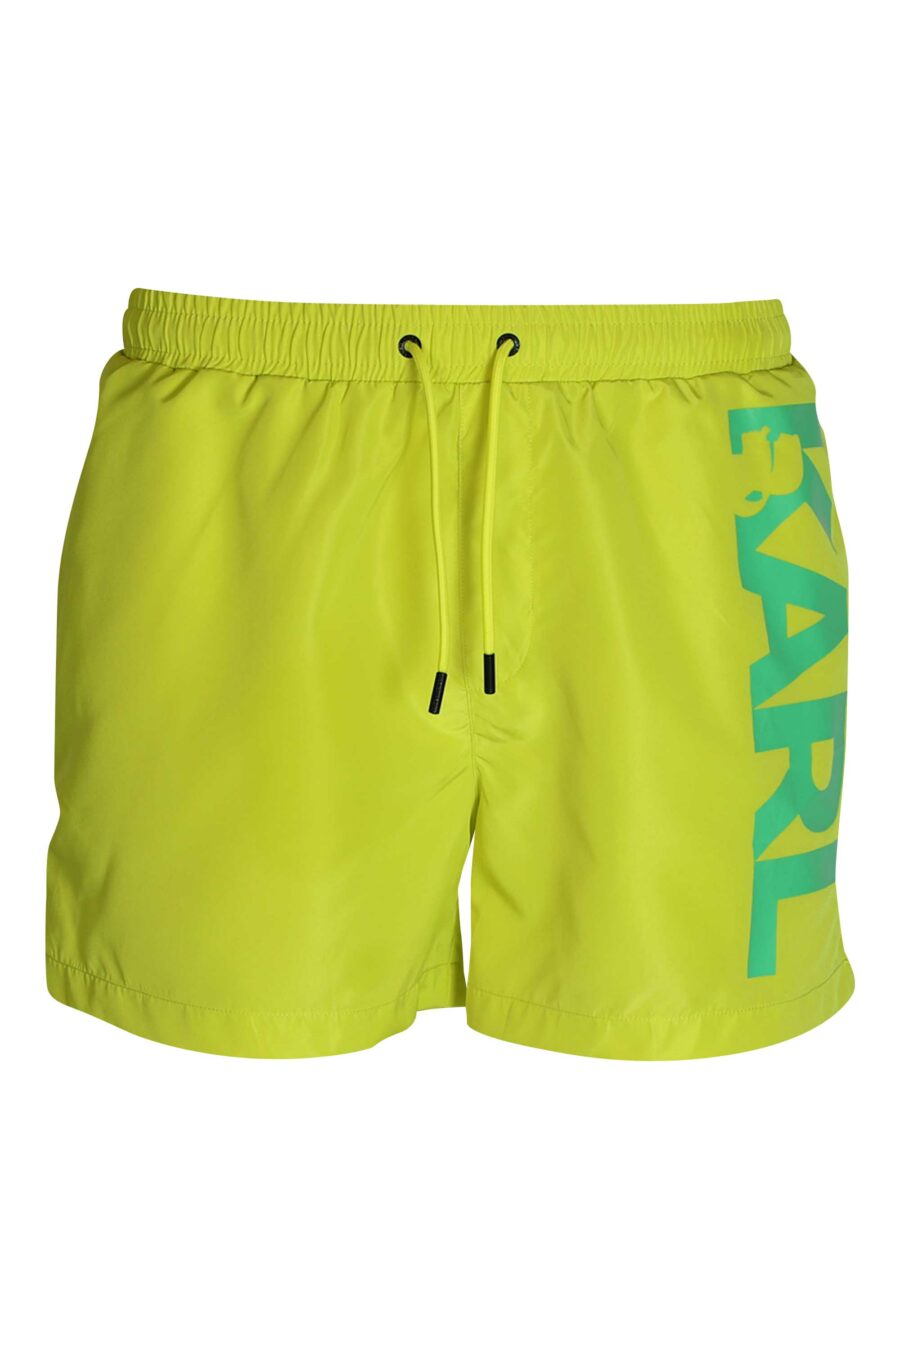 Lime green swimming costume with green side logo - 8720744217916